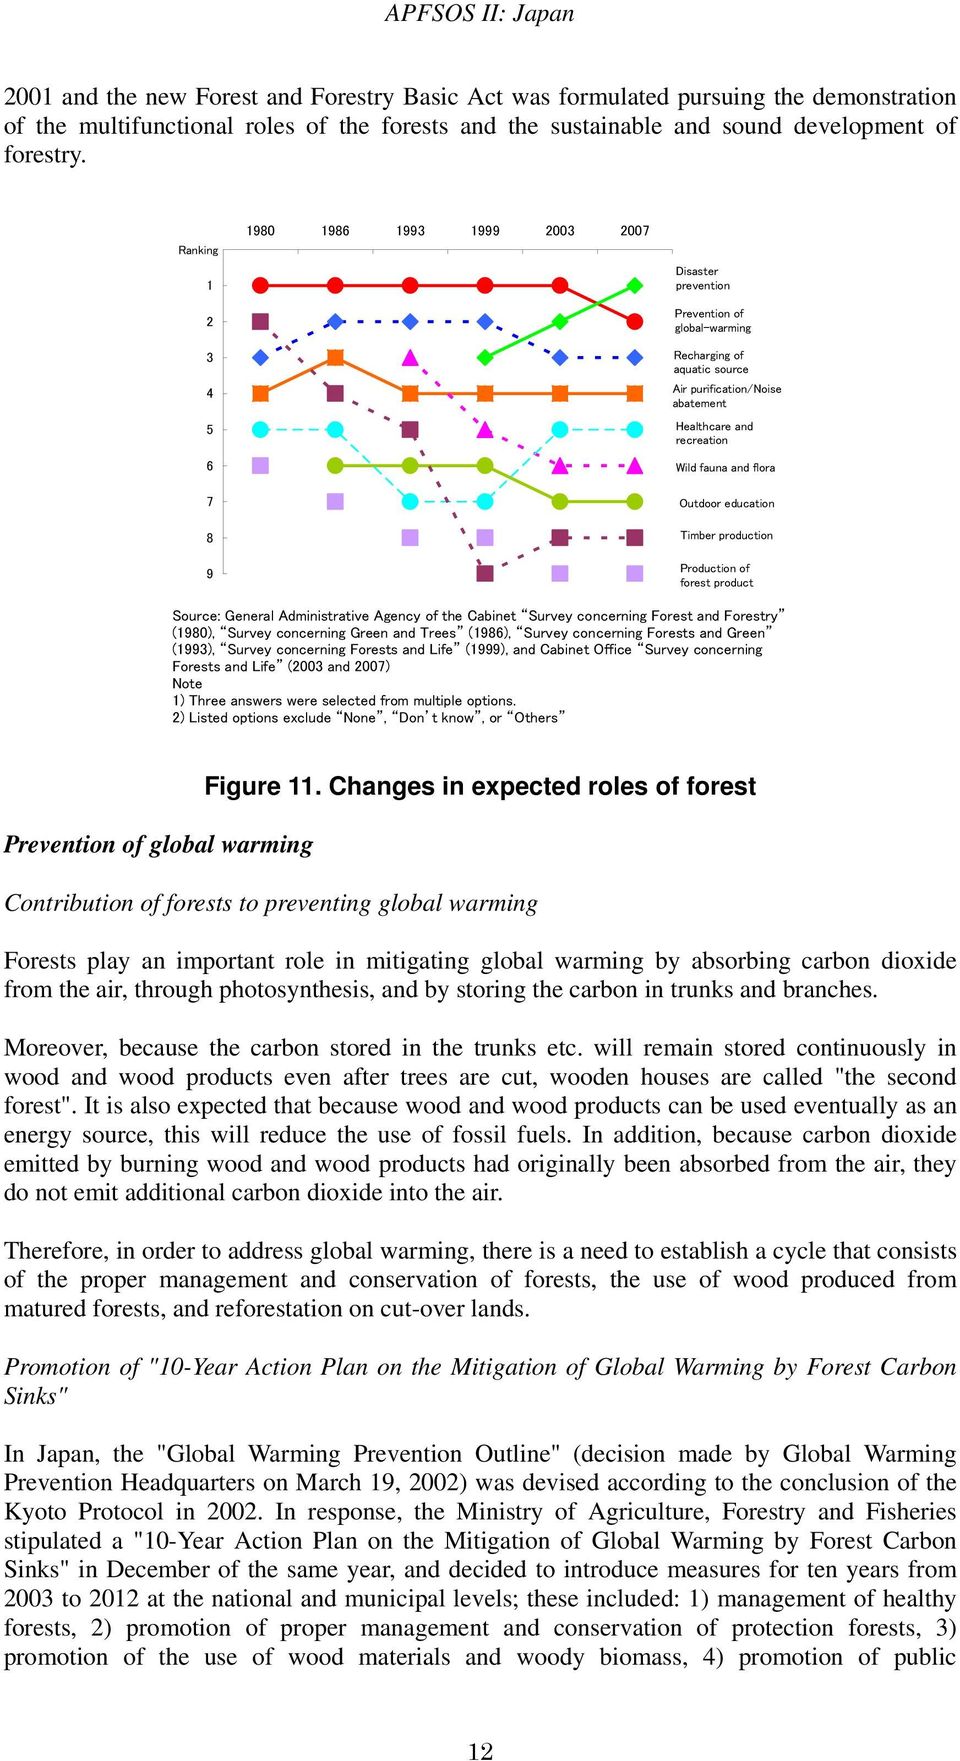 and flora Outdoor education Timber production Production of forest product Source: General Administrative Agency of the Cabinet Survey concerning Forest and Forestry (198), Survey concerning Green